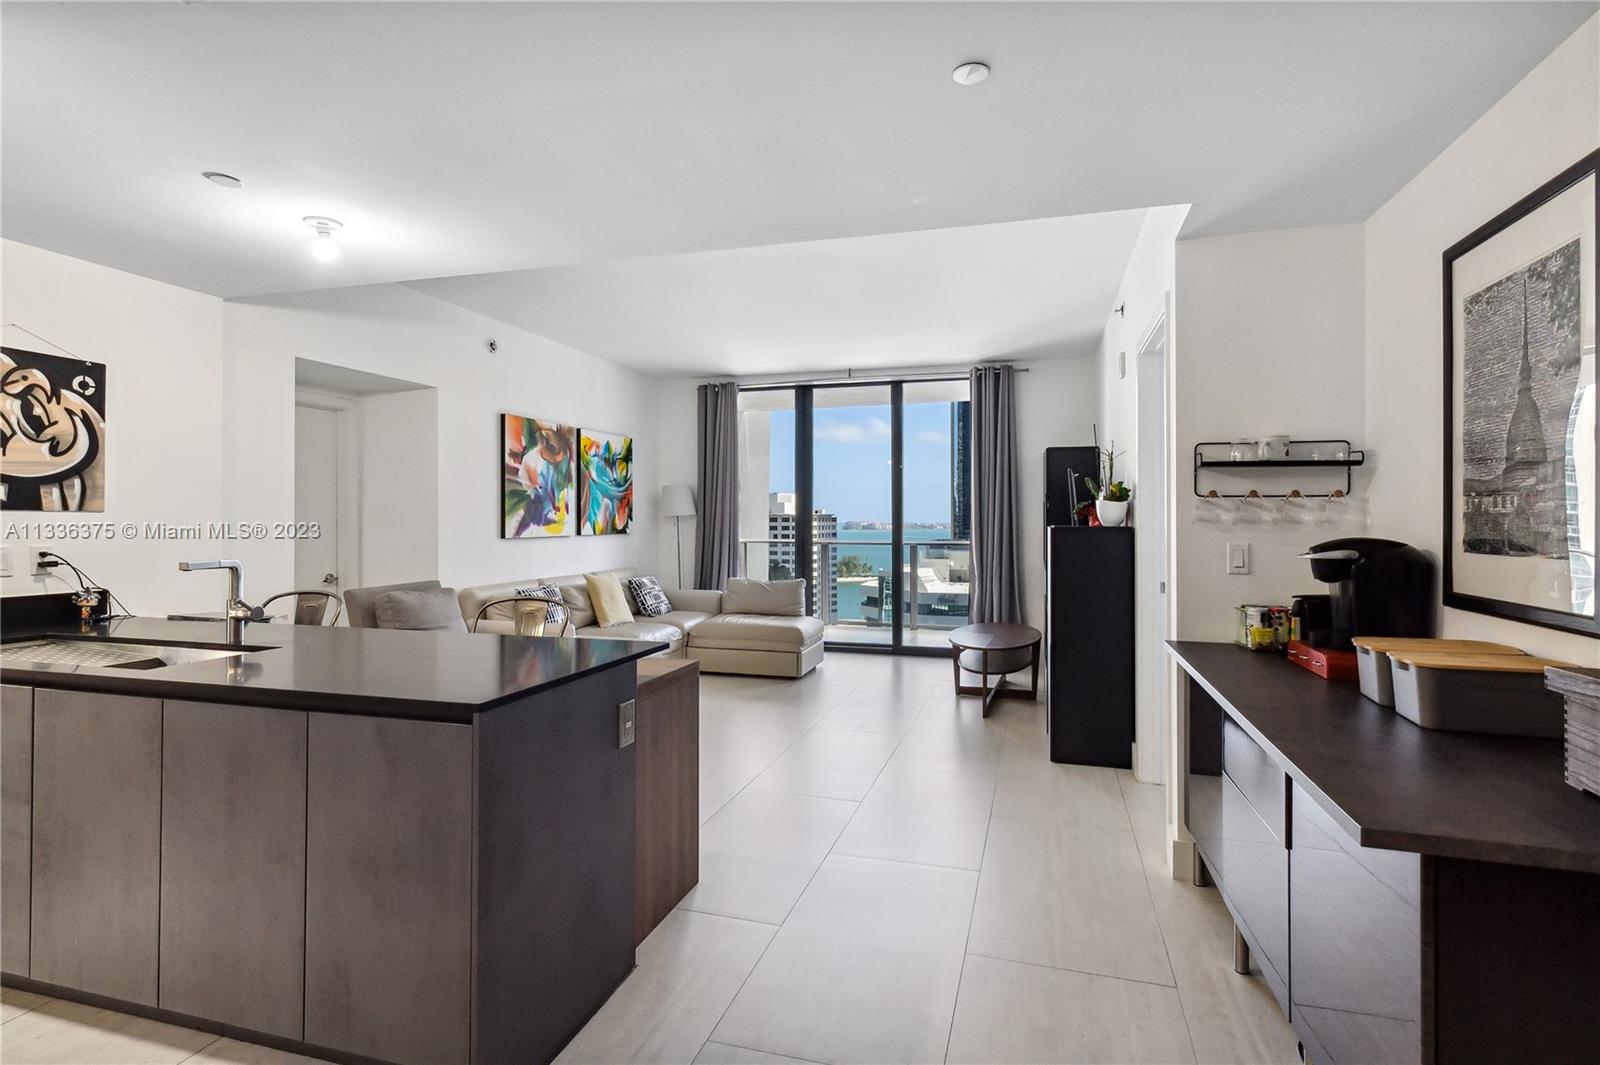 This unit has some great features that sets it apart from other 2 bedroom units: Private Elevator, wood kitchen counter, closets on 2nd bedroom among others. The den is closed with a sliding door and can used as a 3rd bedroom (closets were added).
1010 BRICKELL is known for its superb amenities like indoor heated pool, rooftop pool and BBQ, running track, PICKLE BALL, half basketball court and more!

Enjoy living waking distance to Brickell City Center, Restaurants, work and be on the center of it all!

Eady to show!